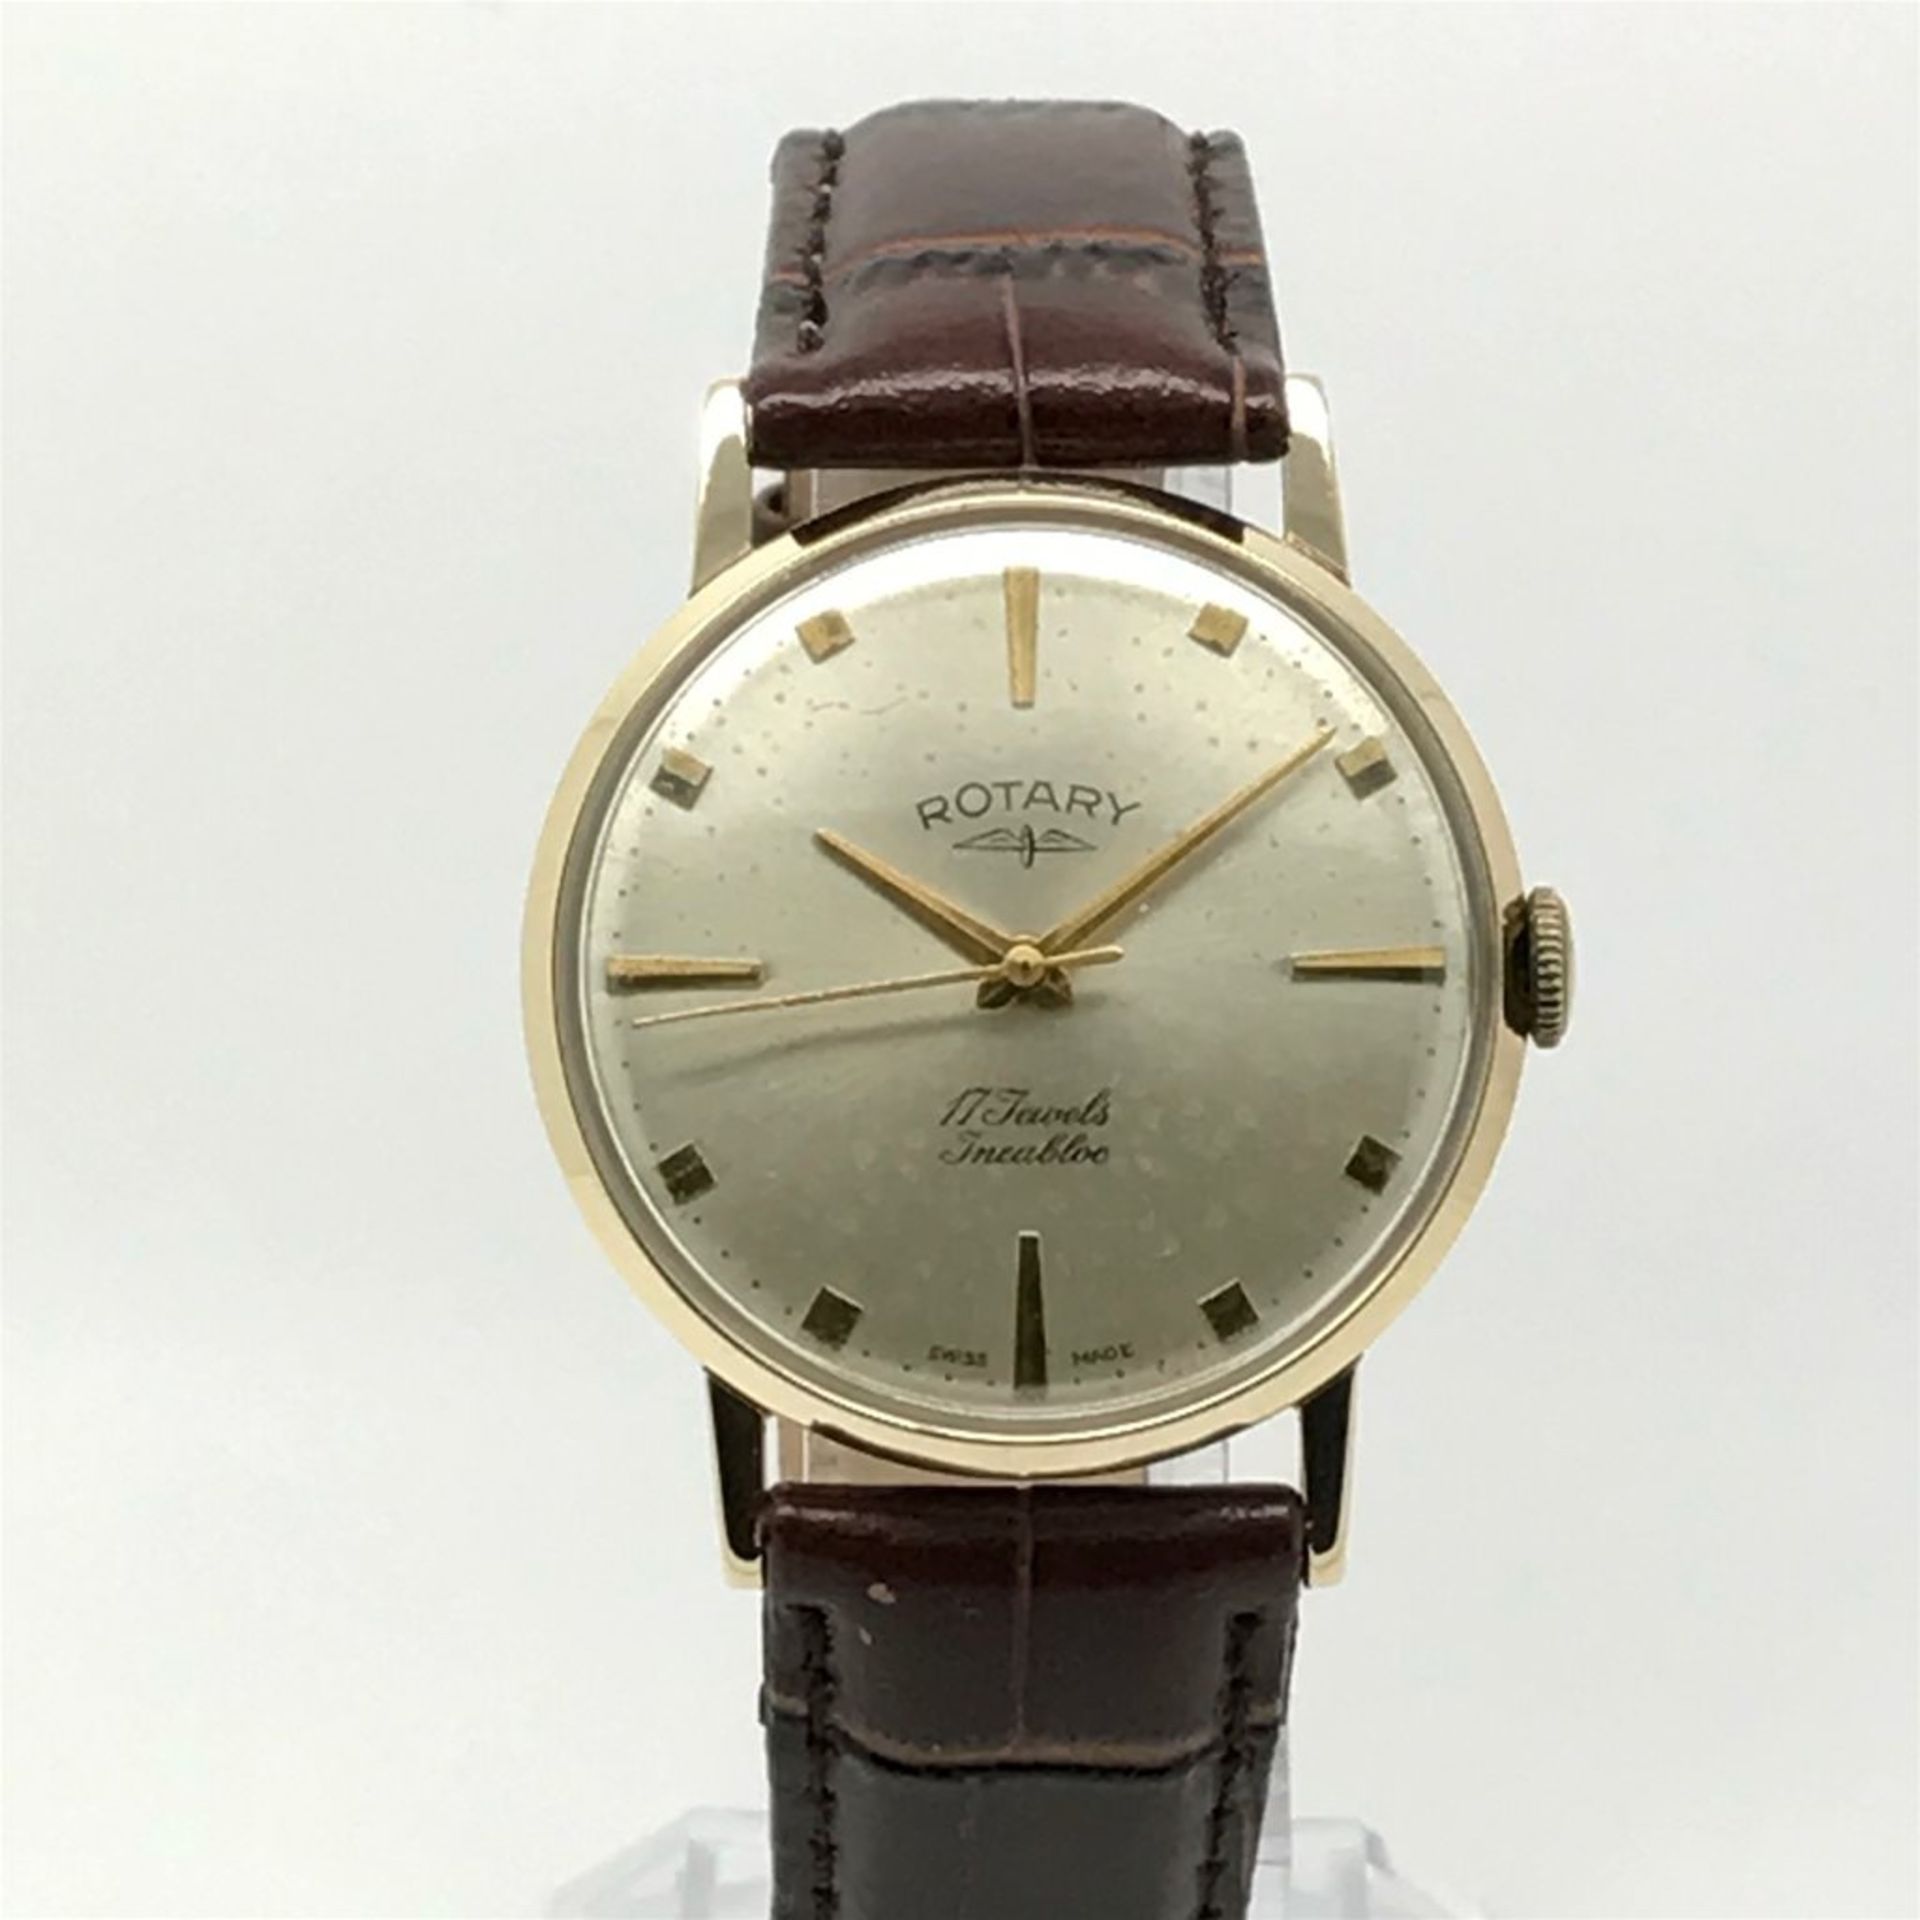 ROTARY Vintage 9ct Gold Mens Watch, Manual Wind